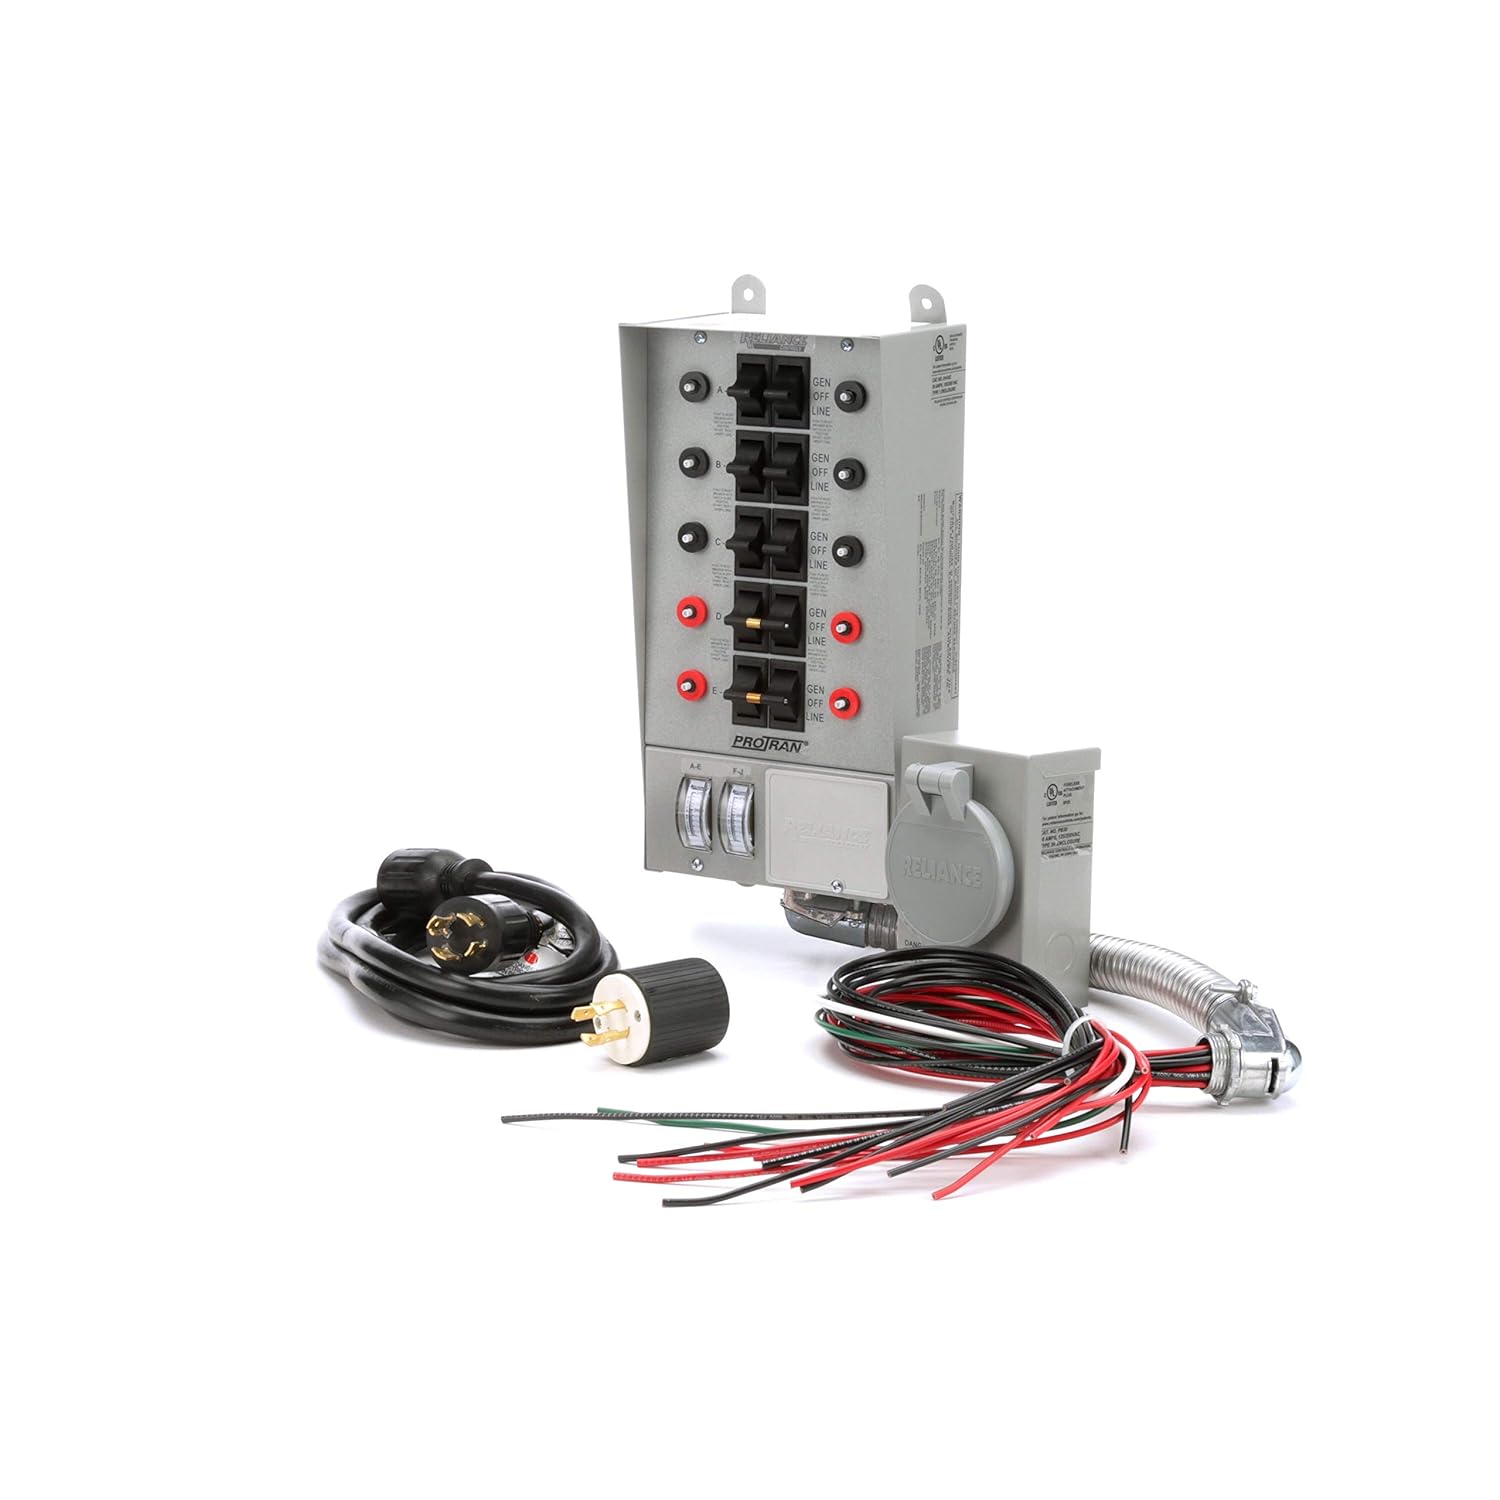 Reliance Controls Transfer Switch Kit Review